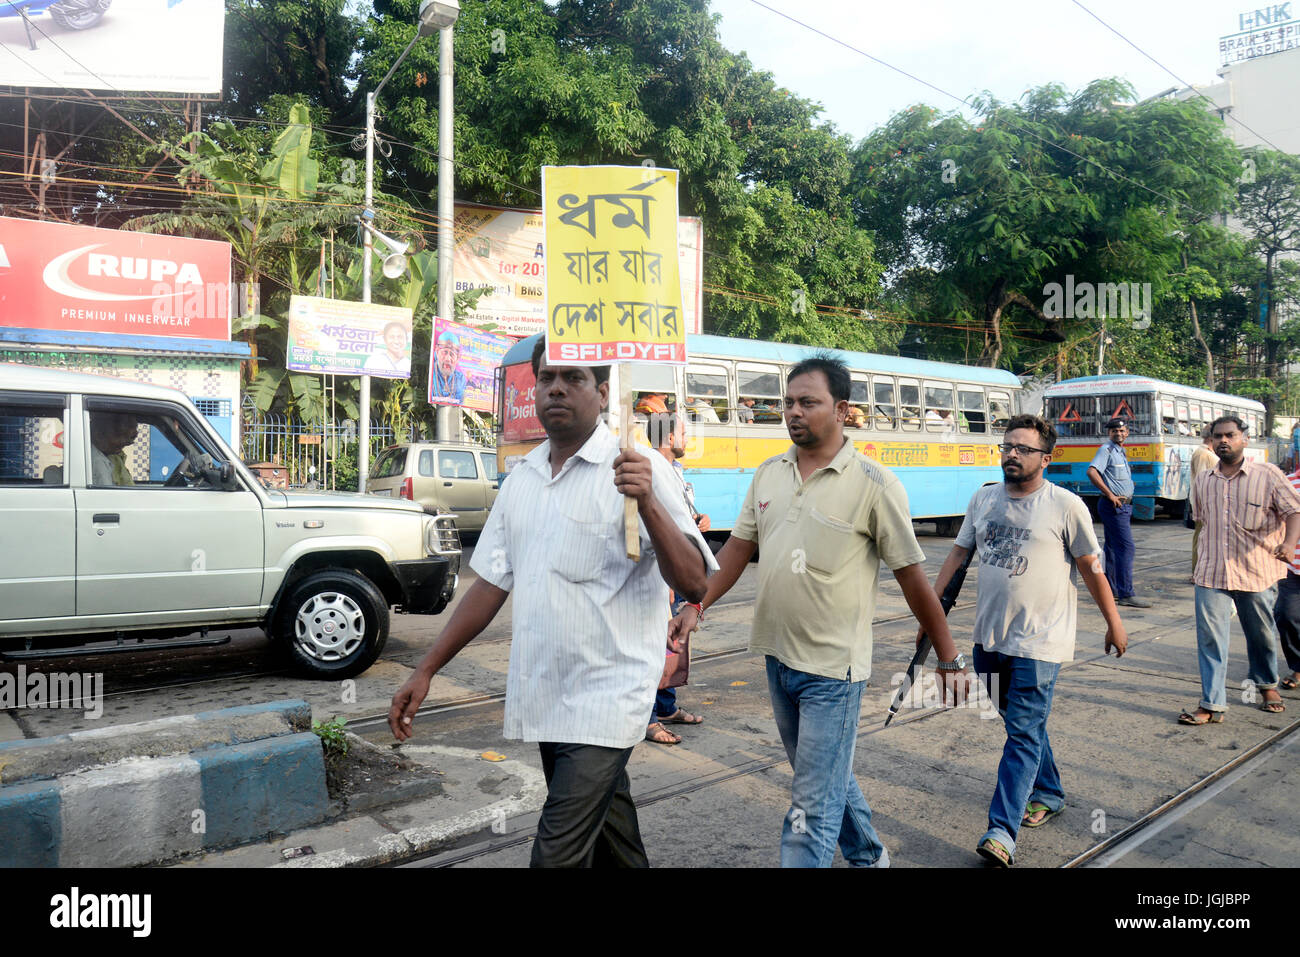 The activist of Student Federation of India (SFI) and Democratic Youth Federation of India (DYFI) organized a rally protesting against recent communal violence at Baduria. (Photo by Saikat Paul / Pacific Press) Stock Photo